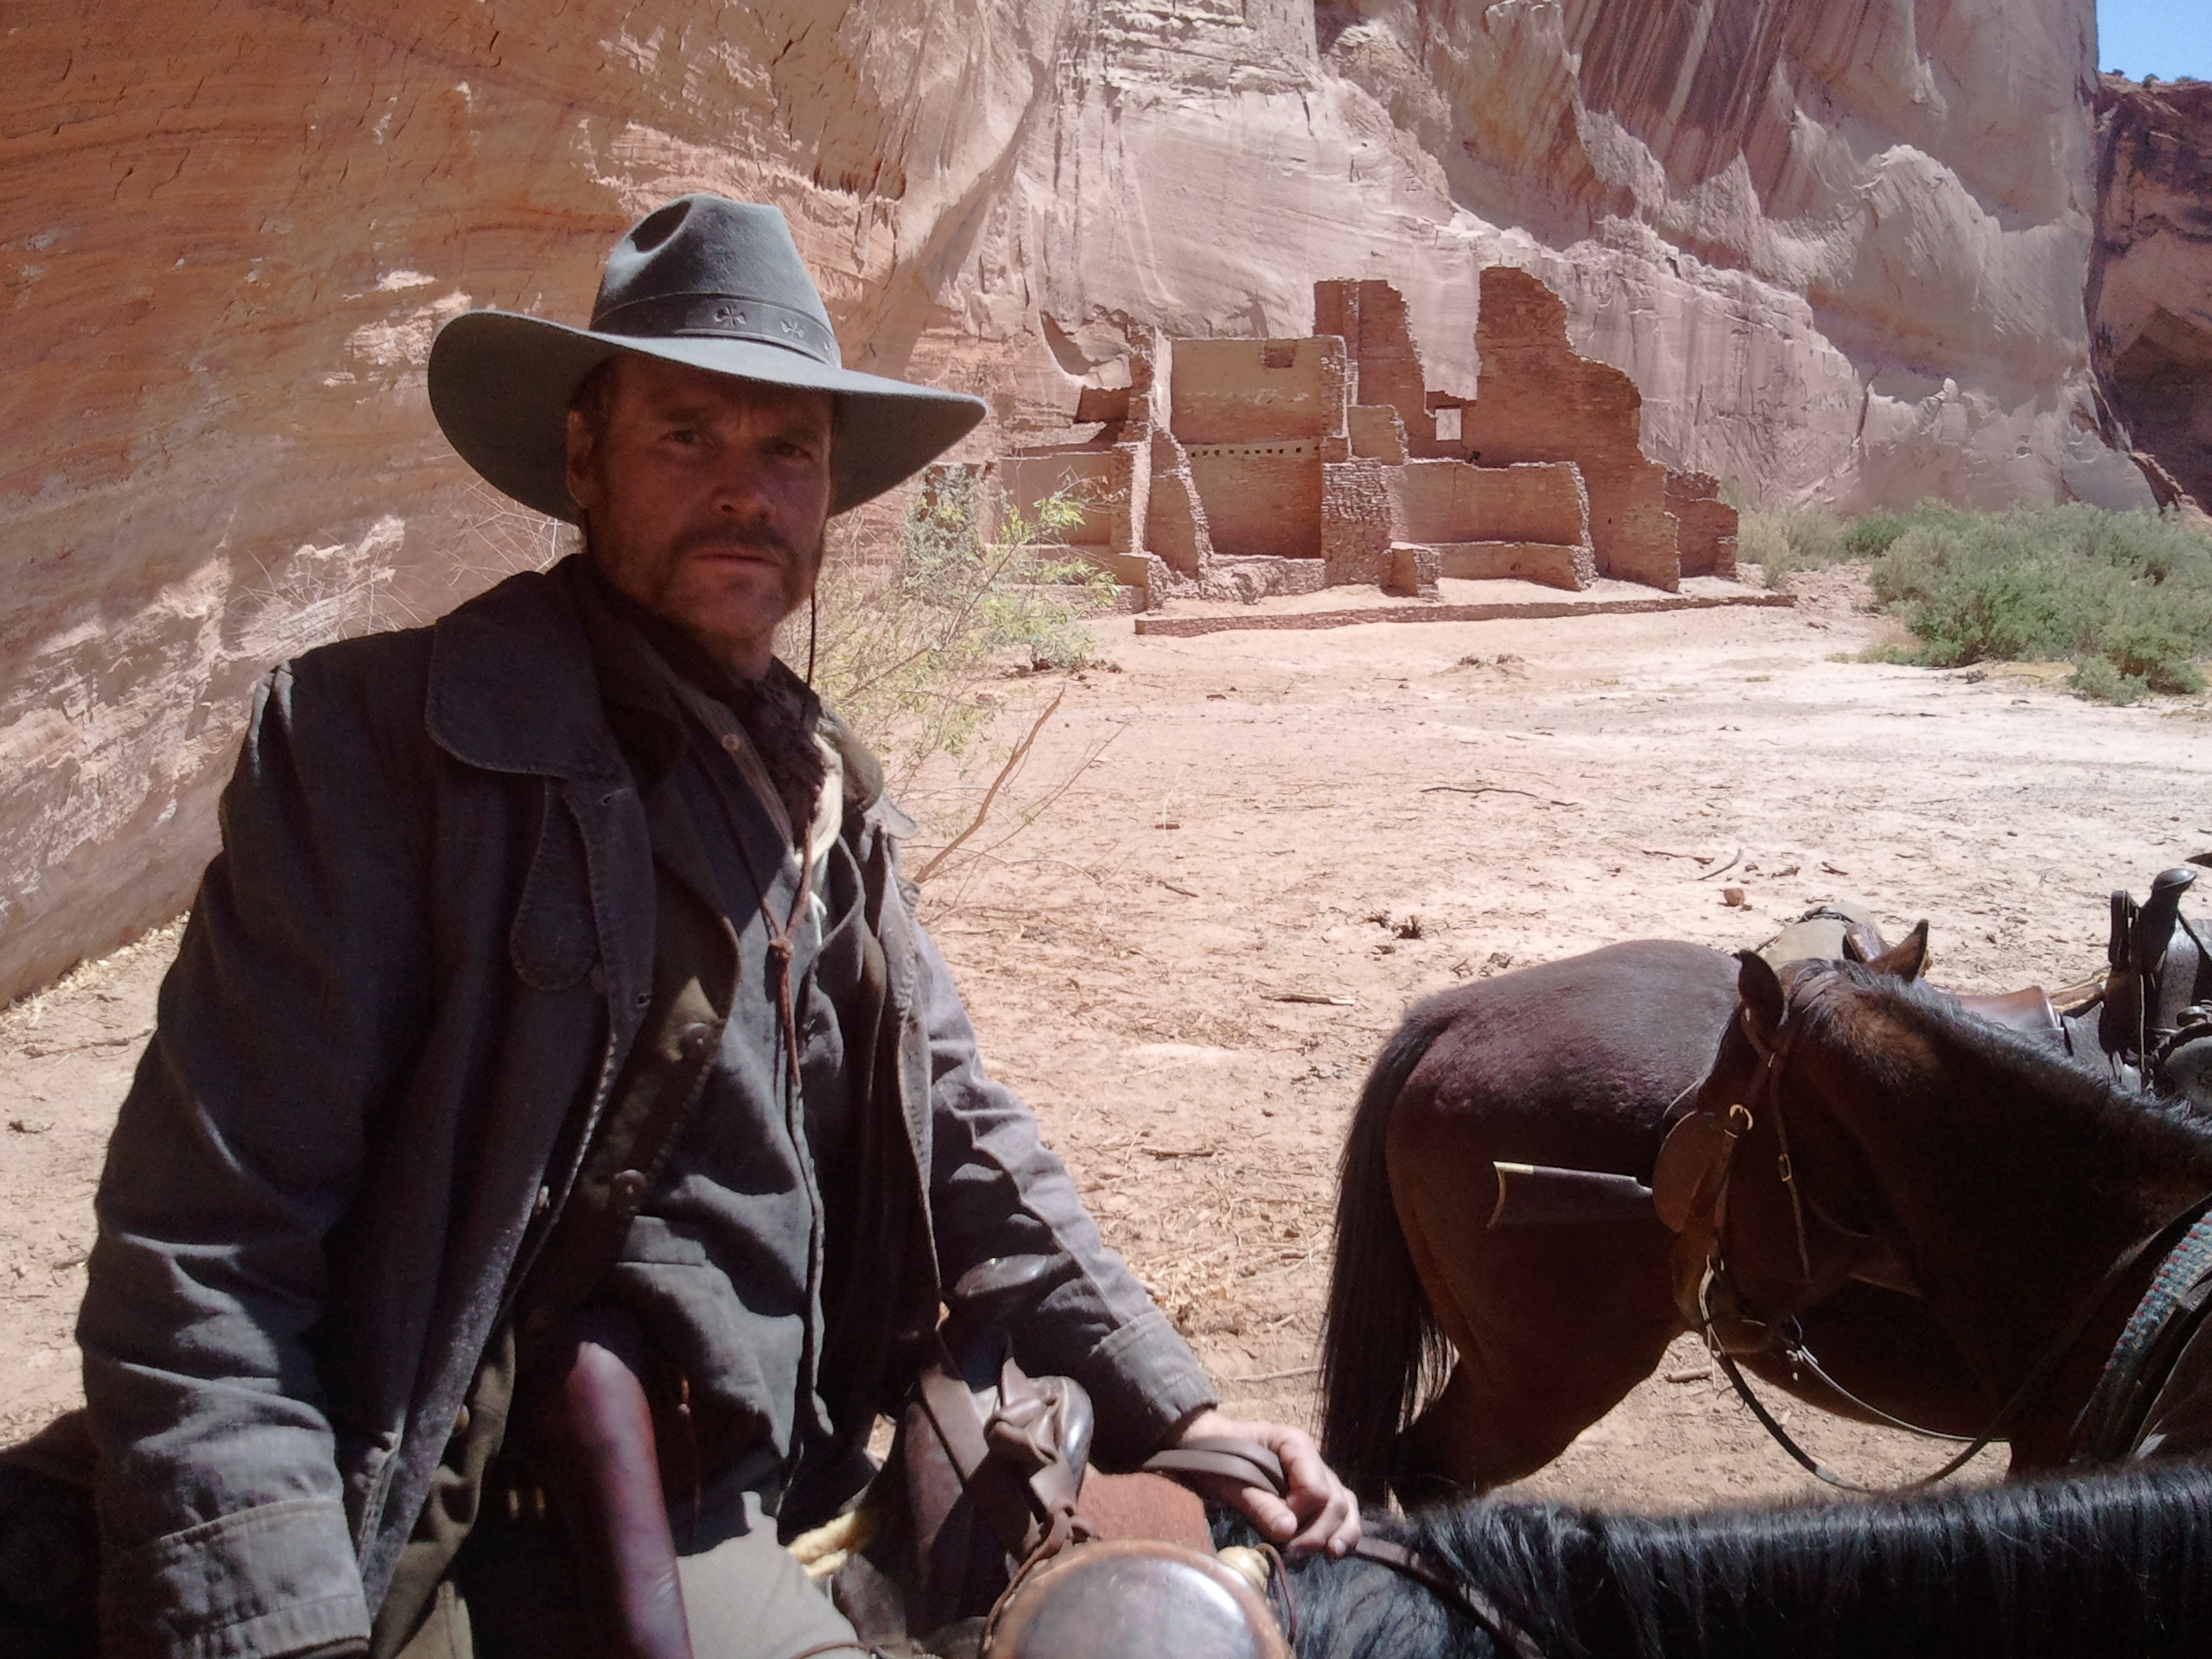 Damon Carney in Canyon de Chelly Arizona on the set of The Lone Ranger